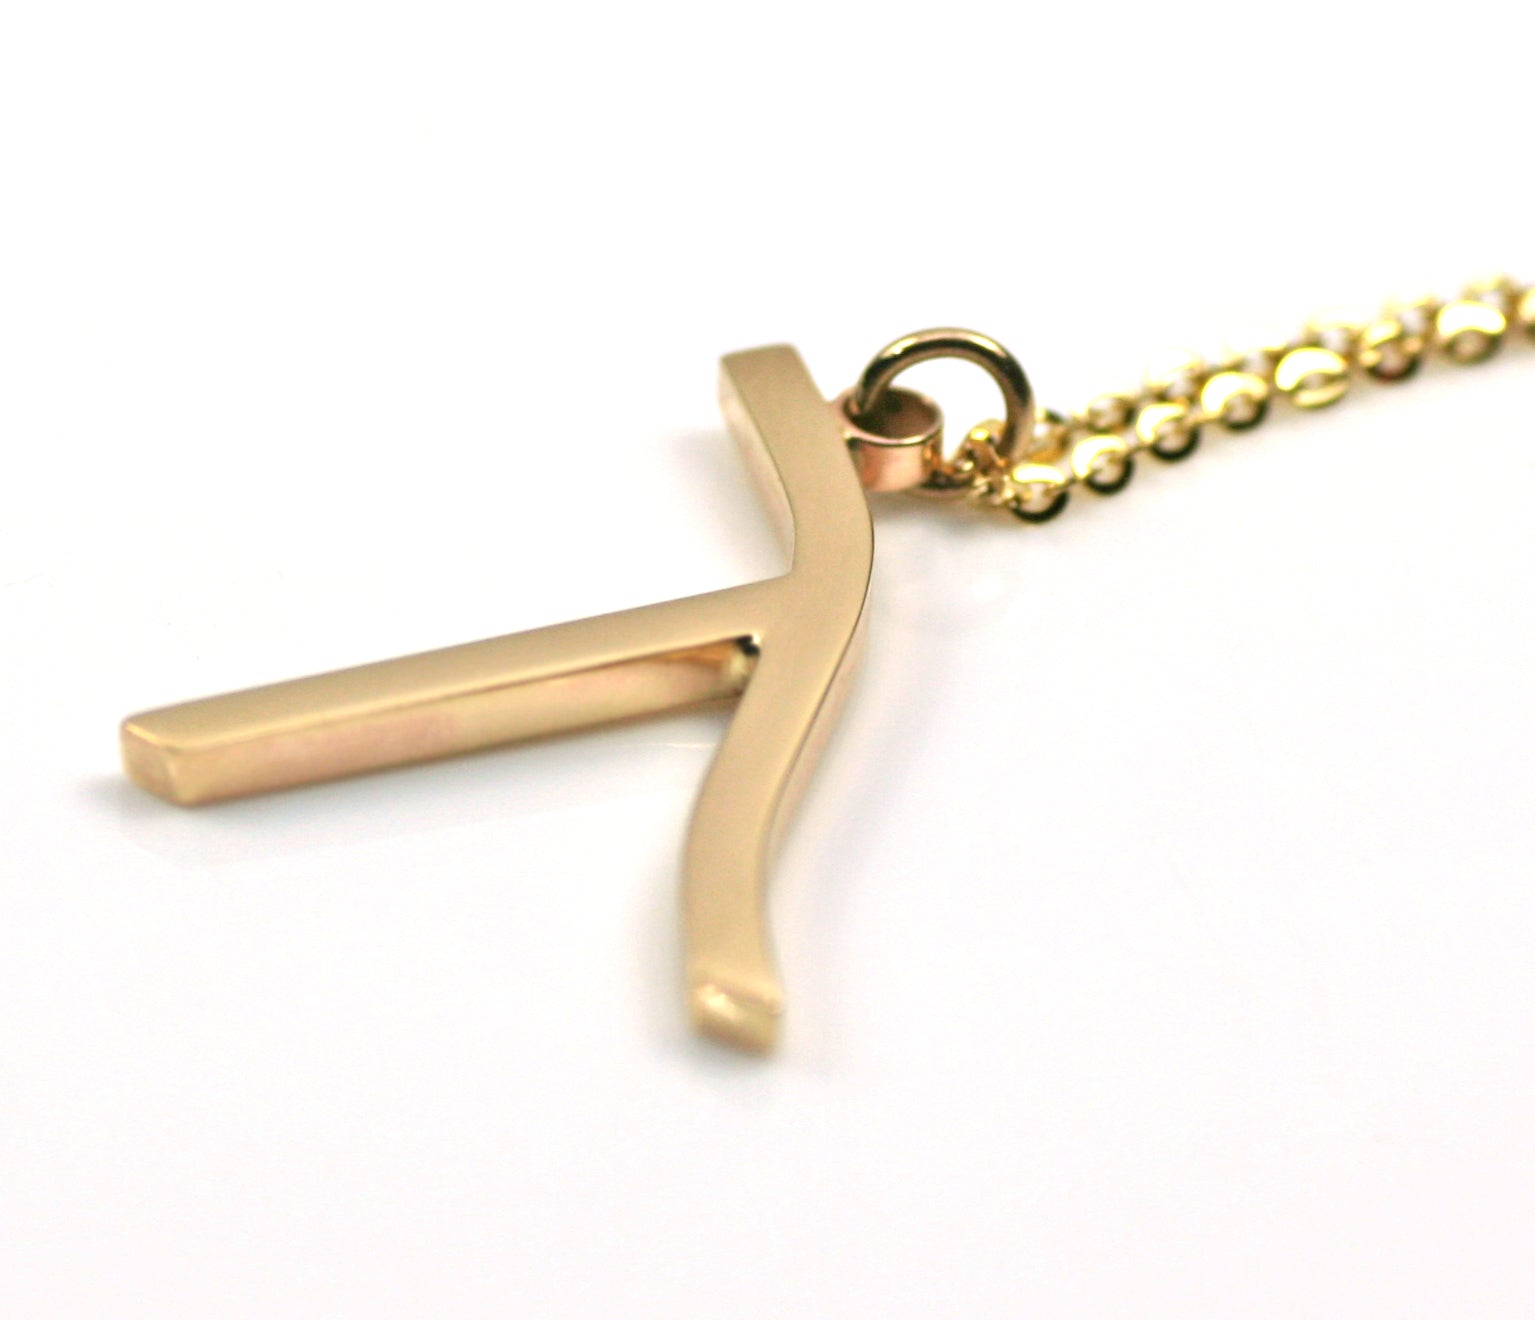 Lambda Necklace, 14k Gold, Gay Pride, Lesbian Necklace, LGBT, Equality, Solid Gold Necklace